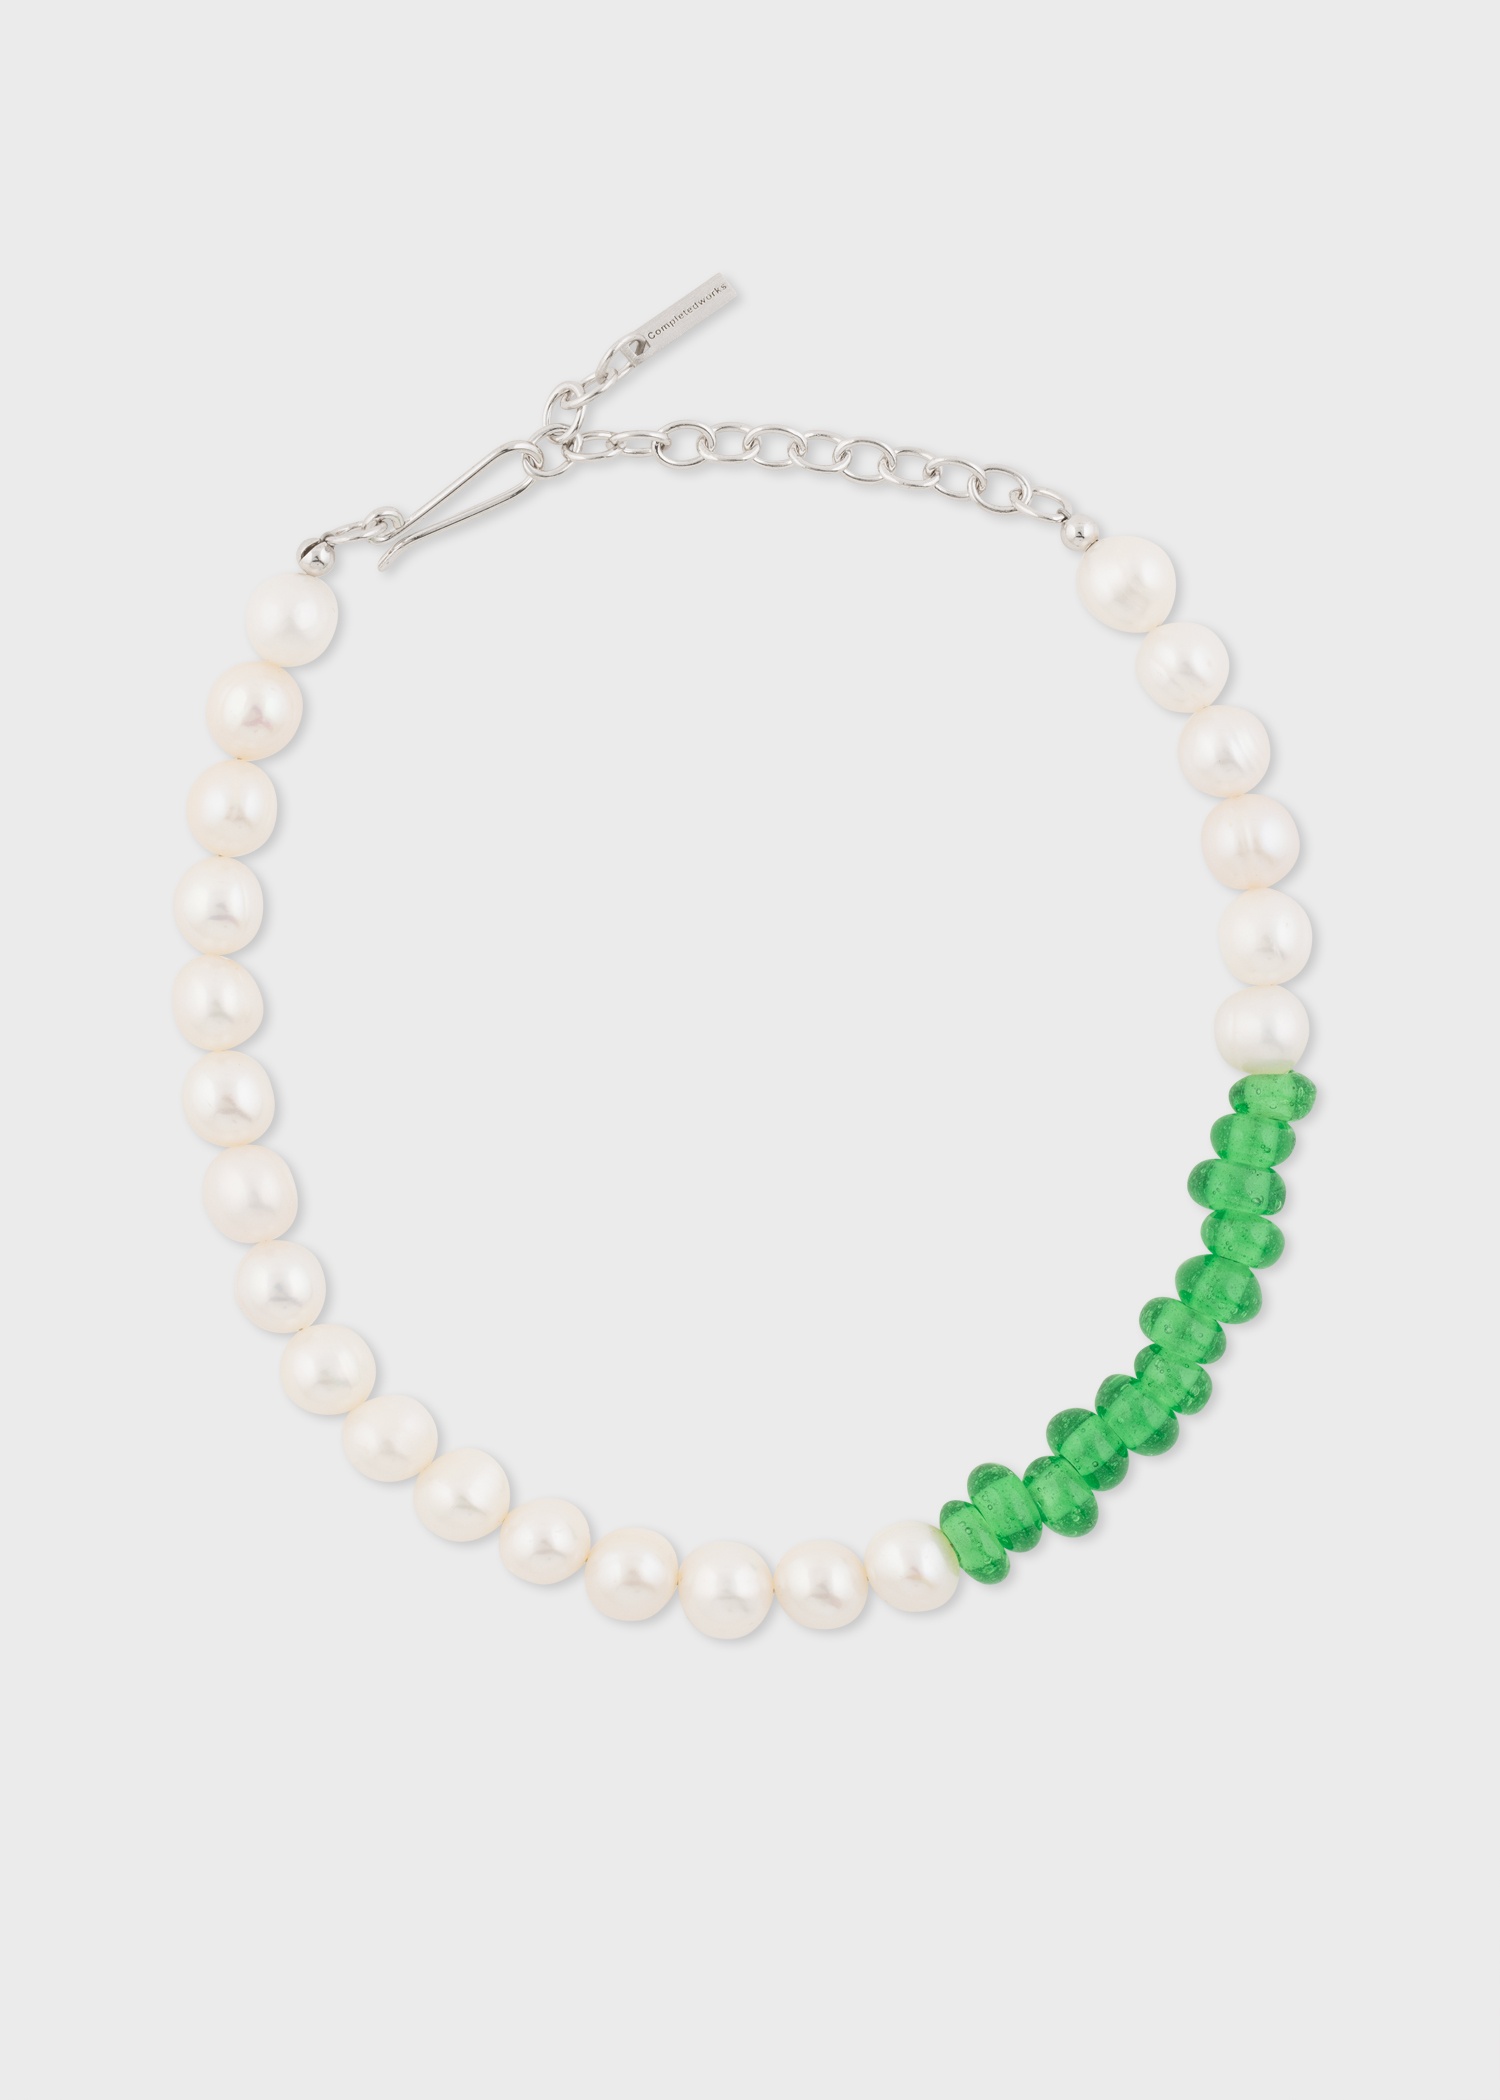 Pearl & Green Glass Bead Bracelet by Completedworks - 1